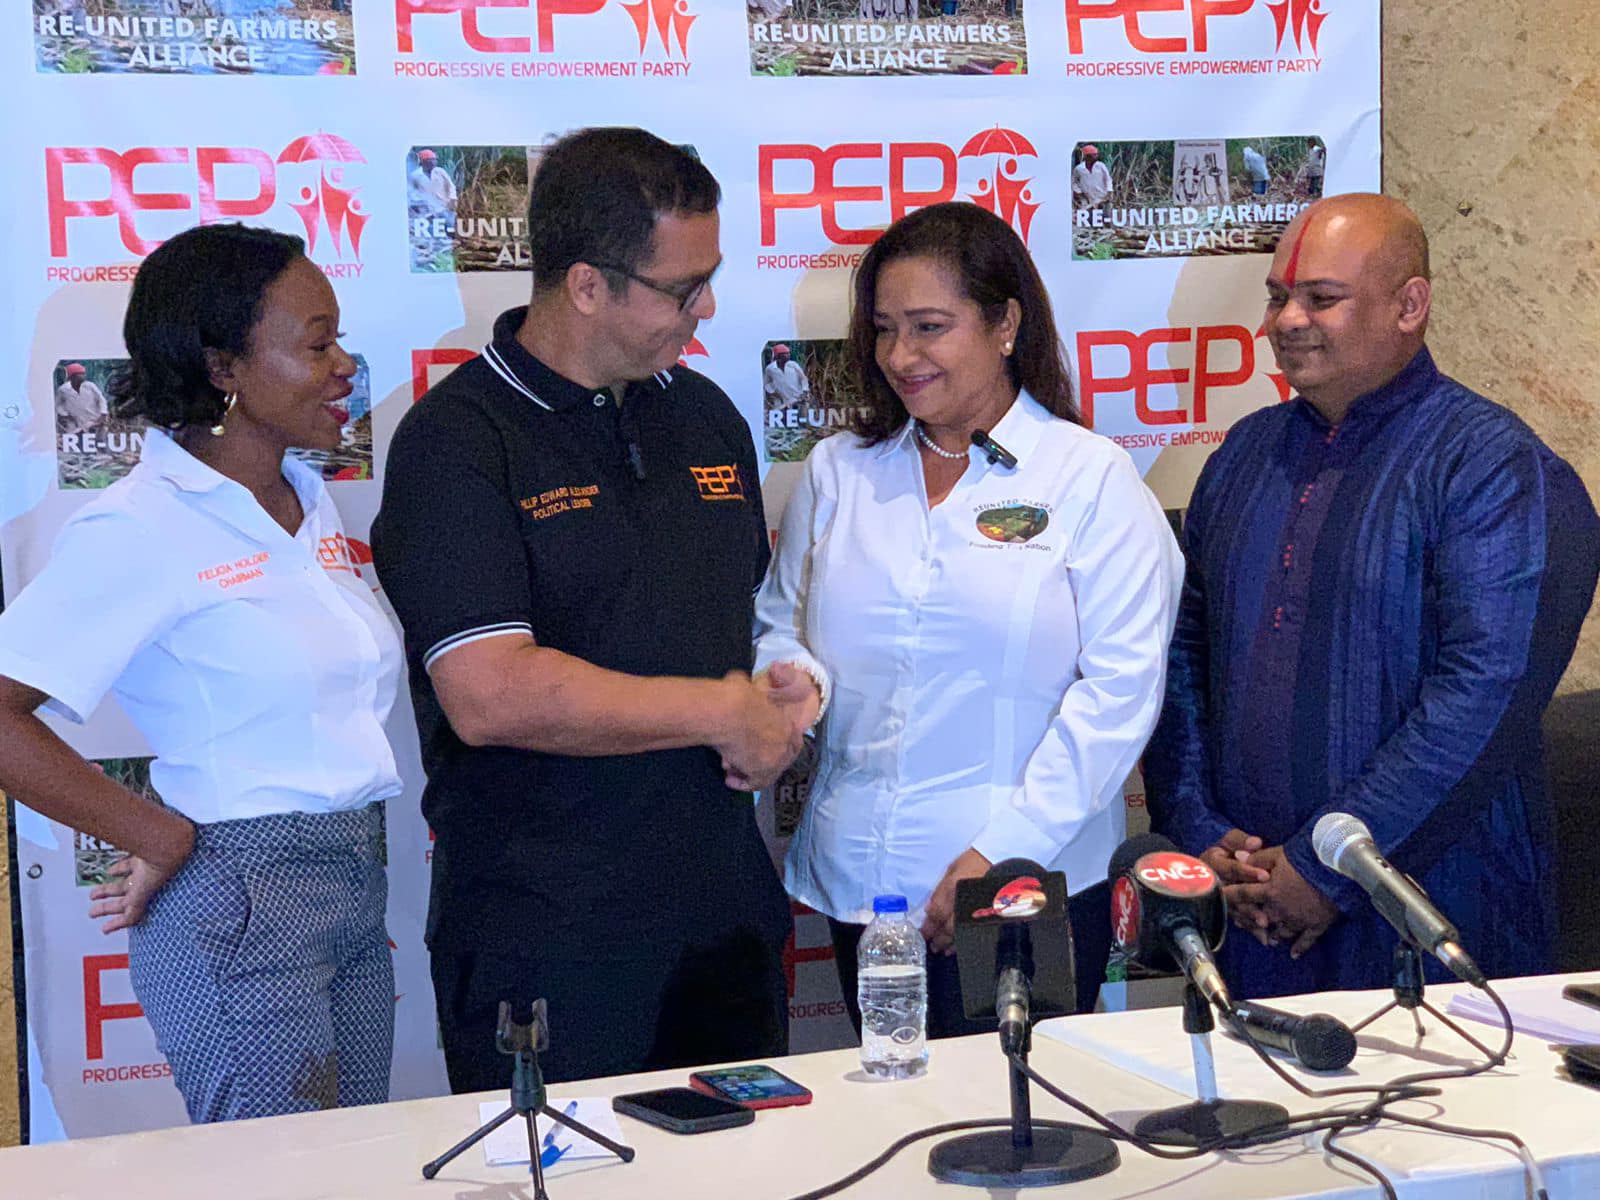 PEP contesting all 141 seats in LGE; joining forces with Re-United Farmers